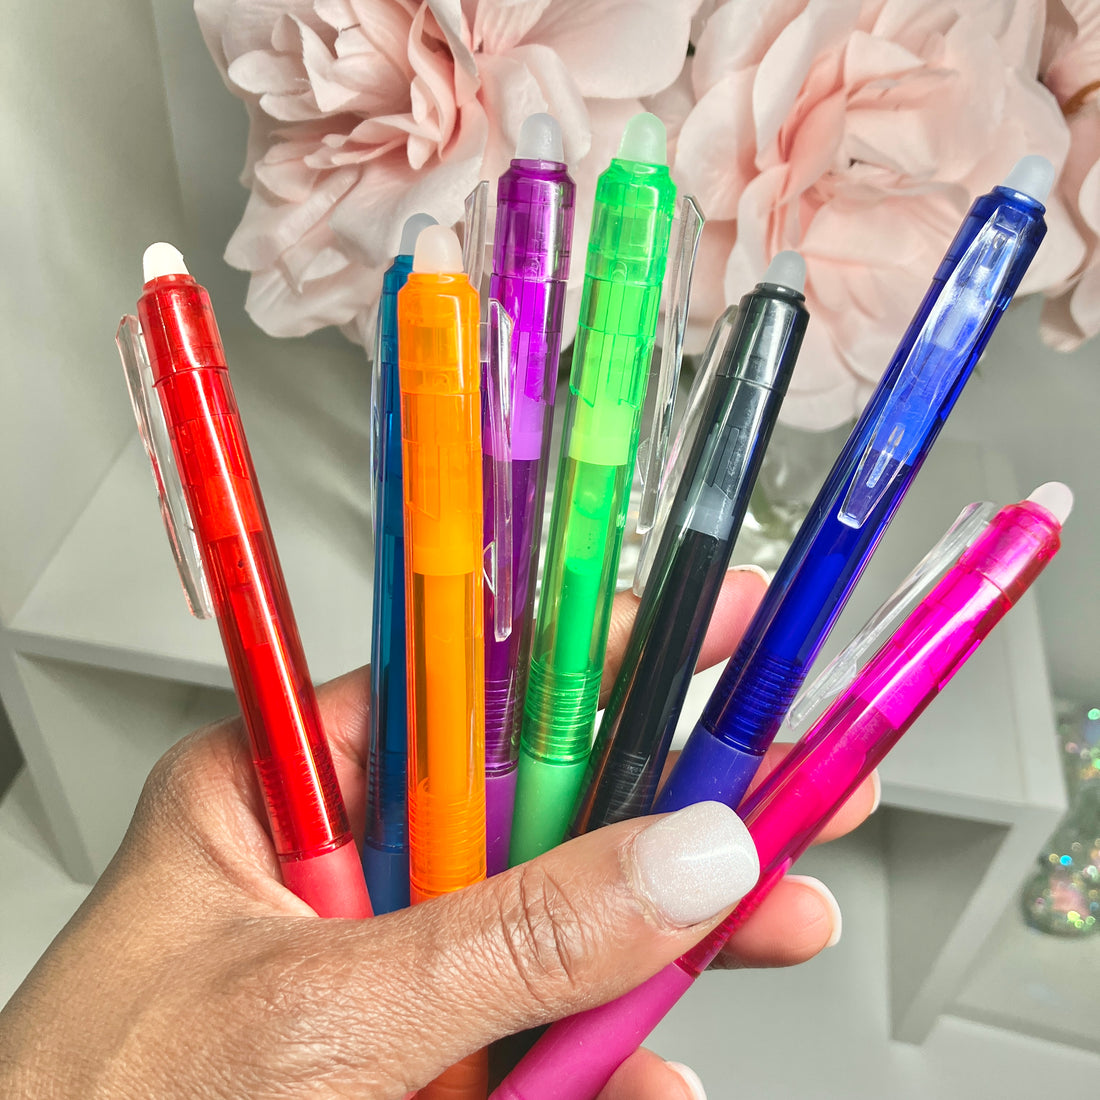 Why you need these erasable pens